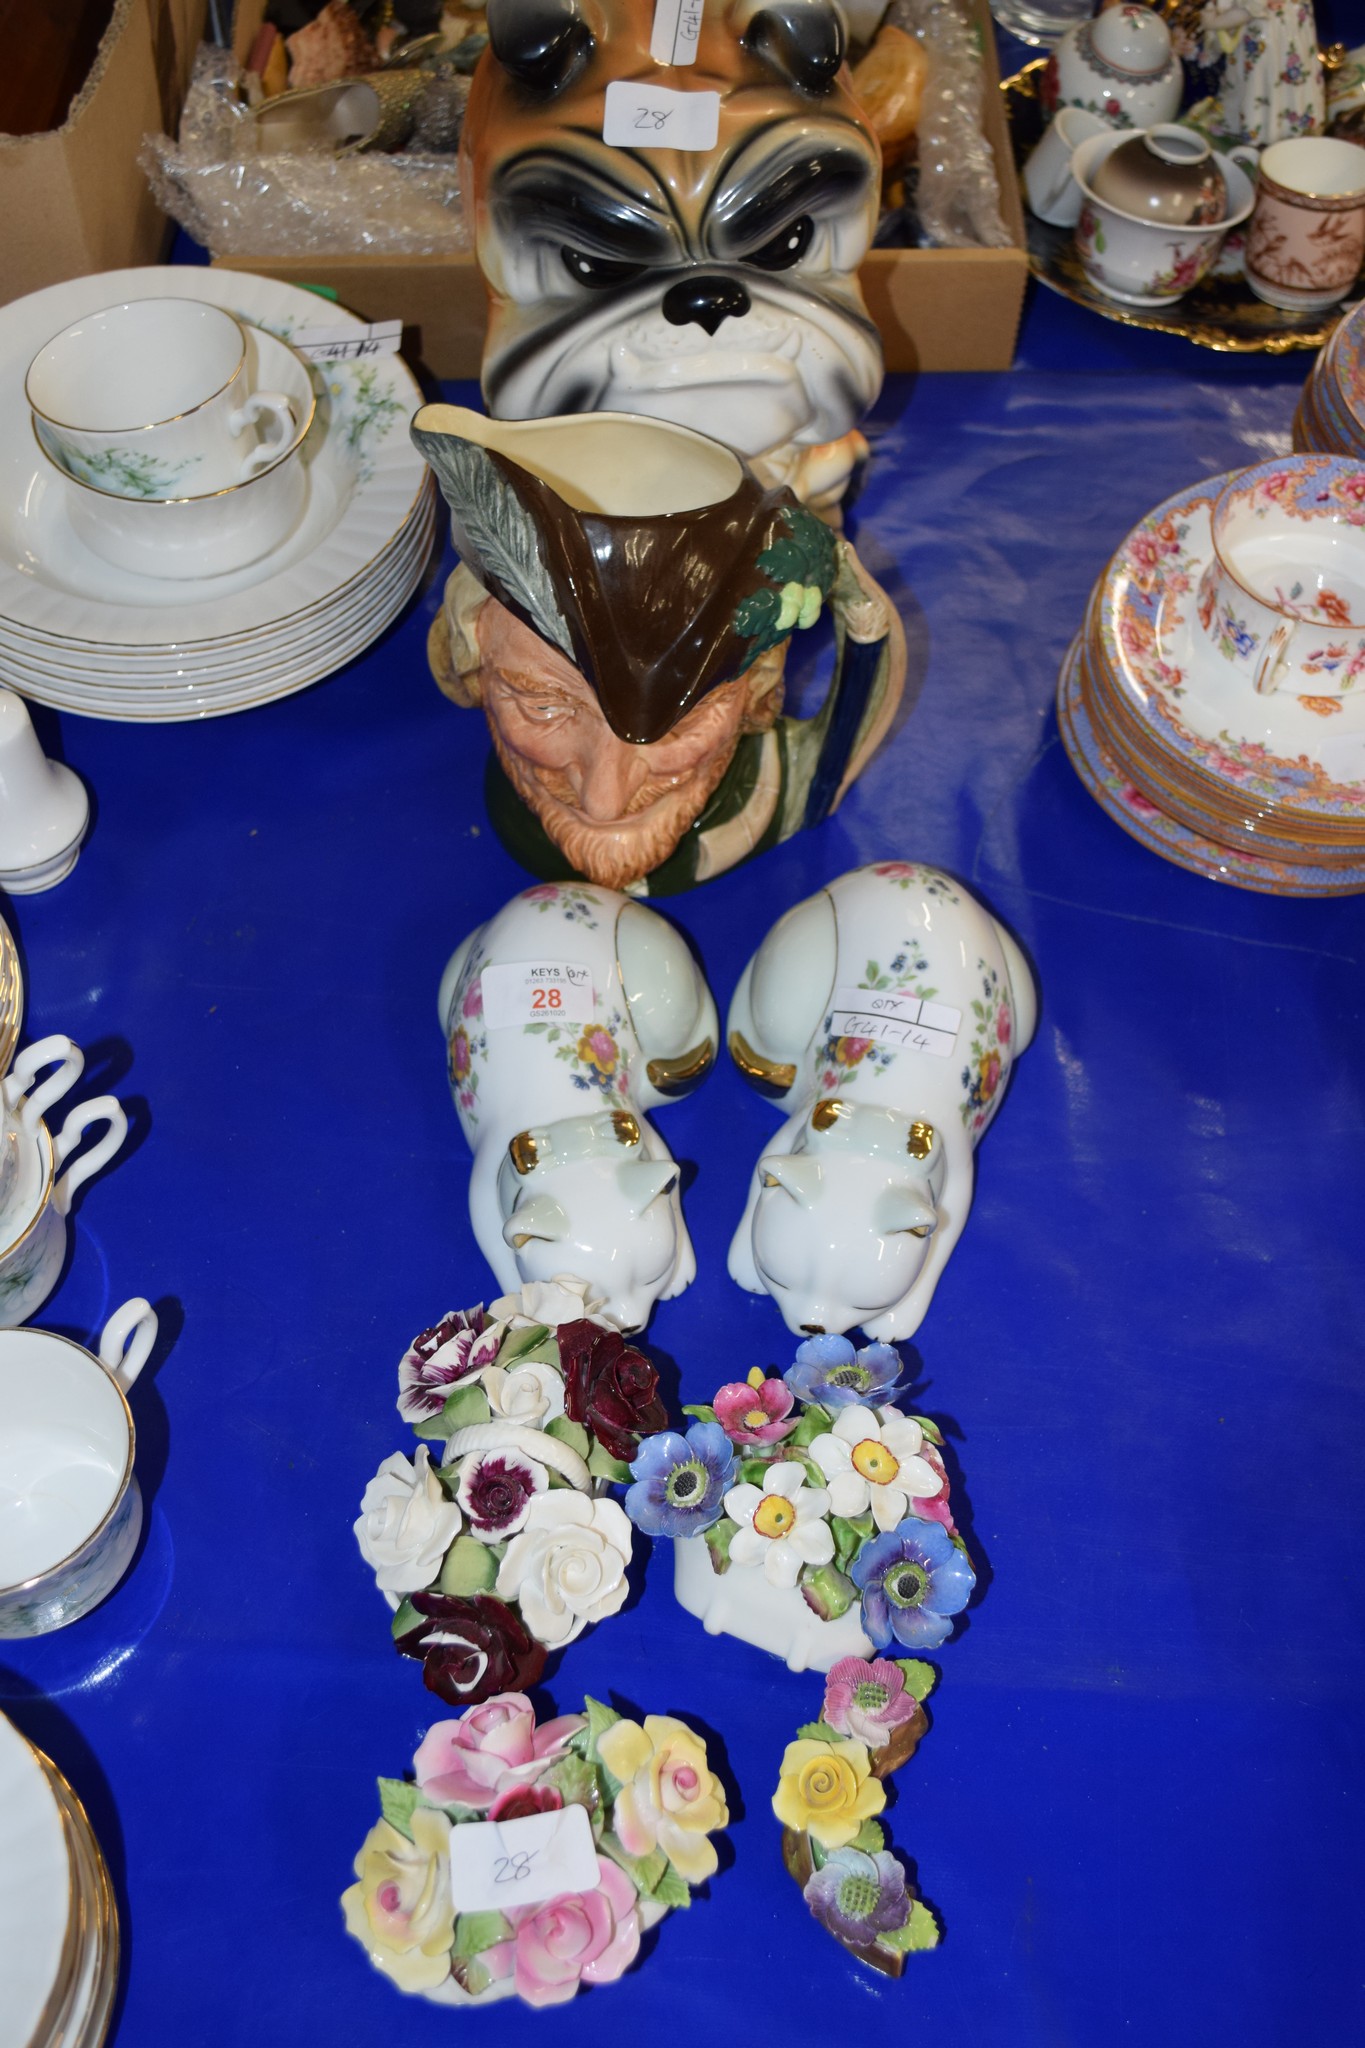 CERAMICS INCLUDING VASES AND FLOWERS BY ROYAL STAFFORD AND A ROYAL DOULTON TOBY JUG OF ROBIN HOOD